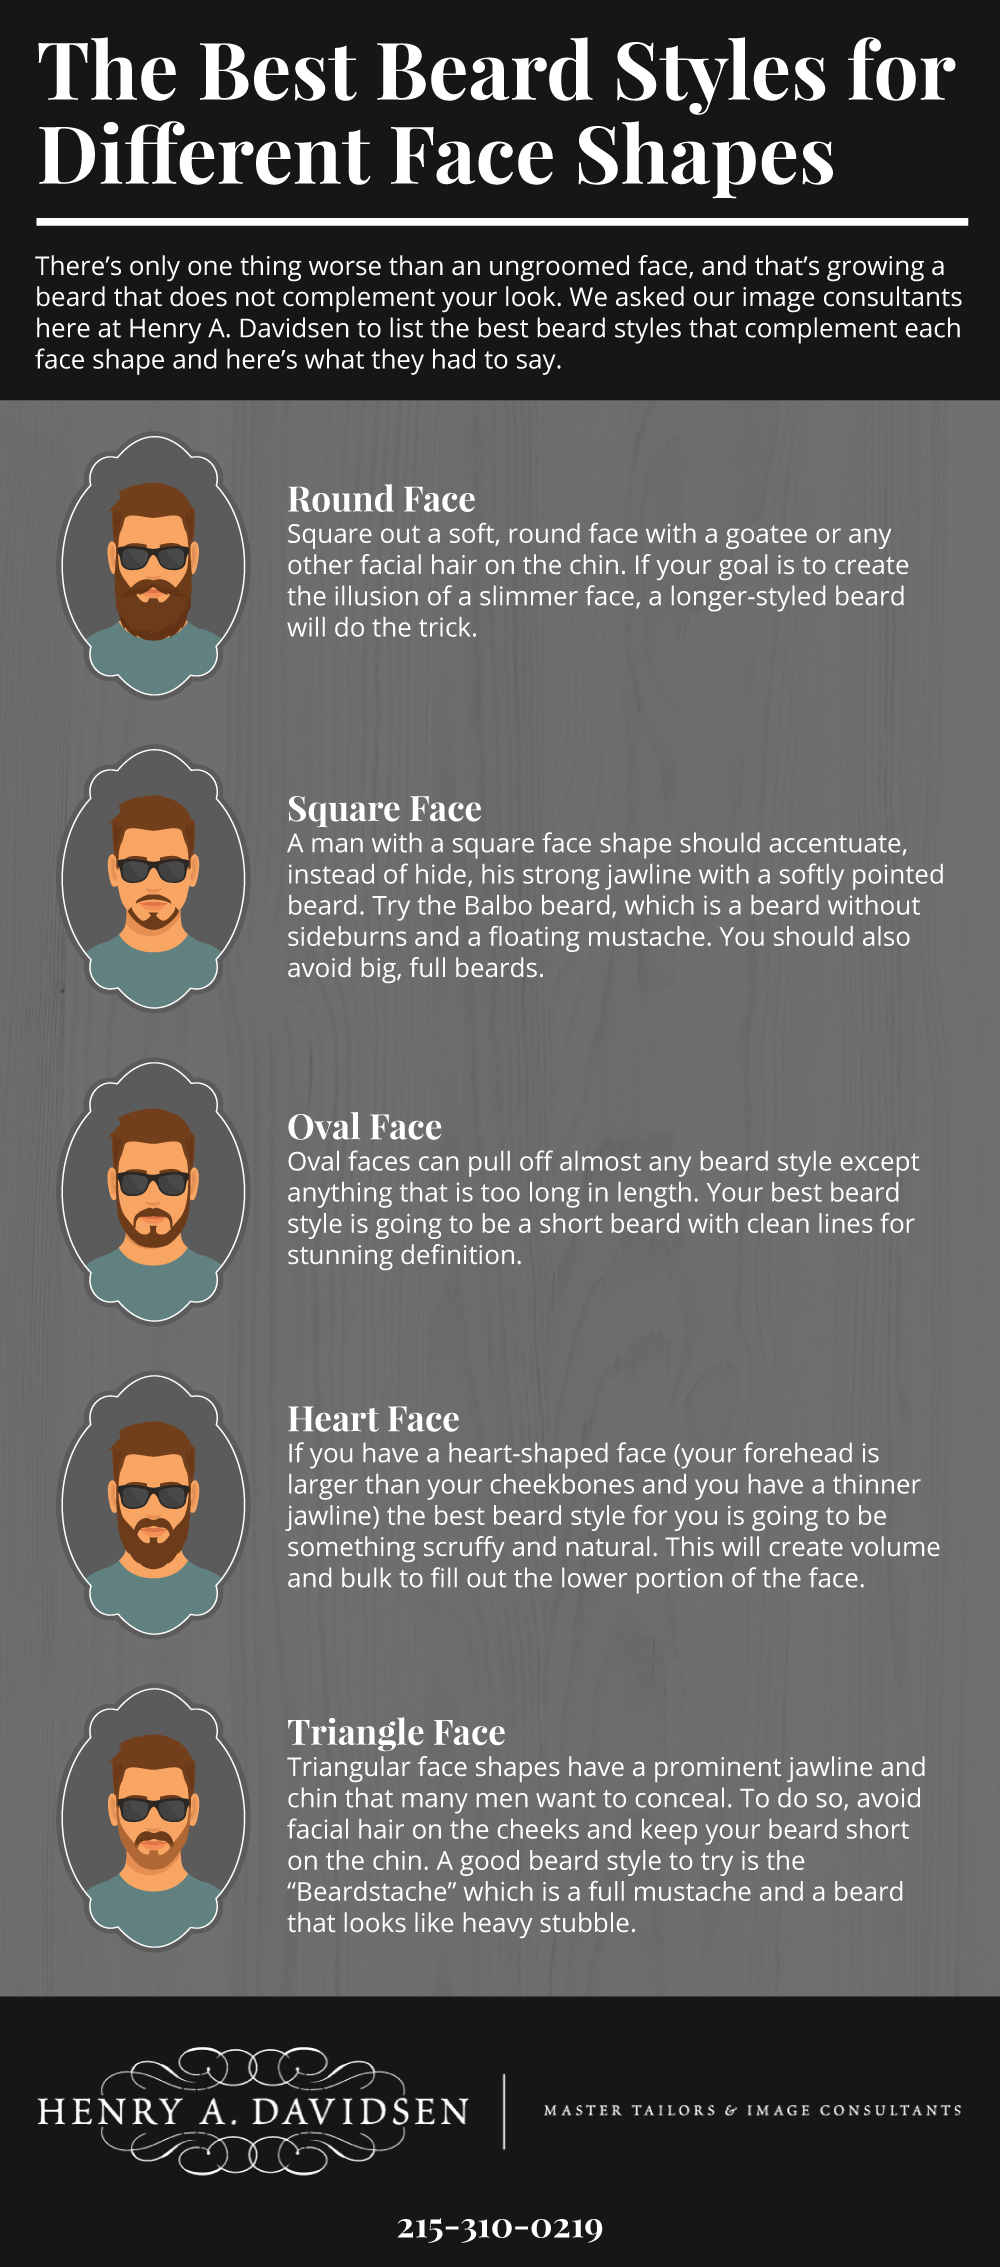 The Best Beard Styles for Different Face Shapes - Henry A Davidsen